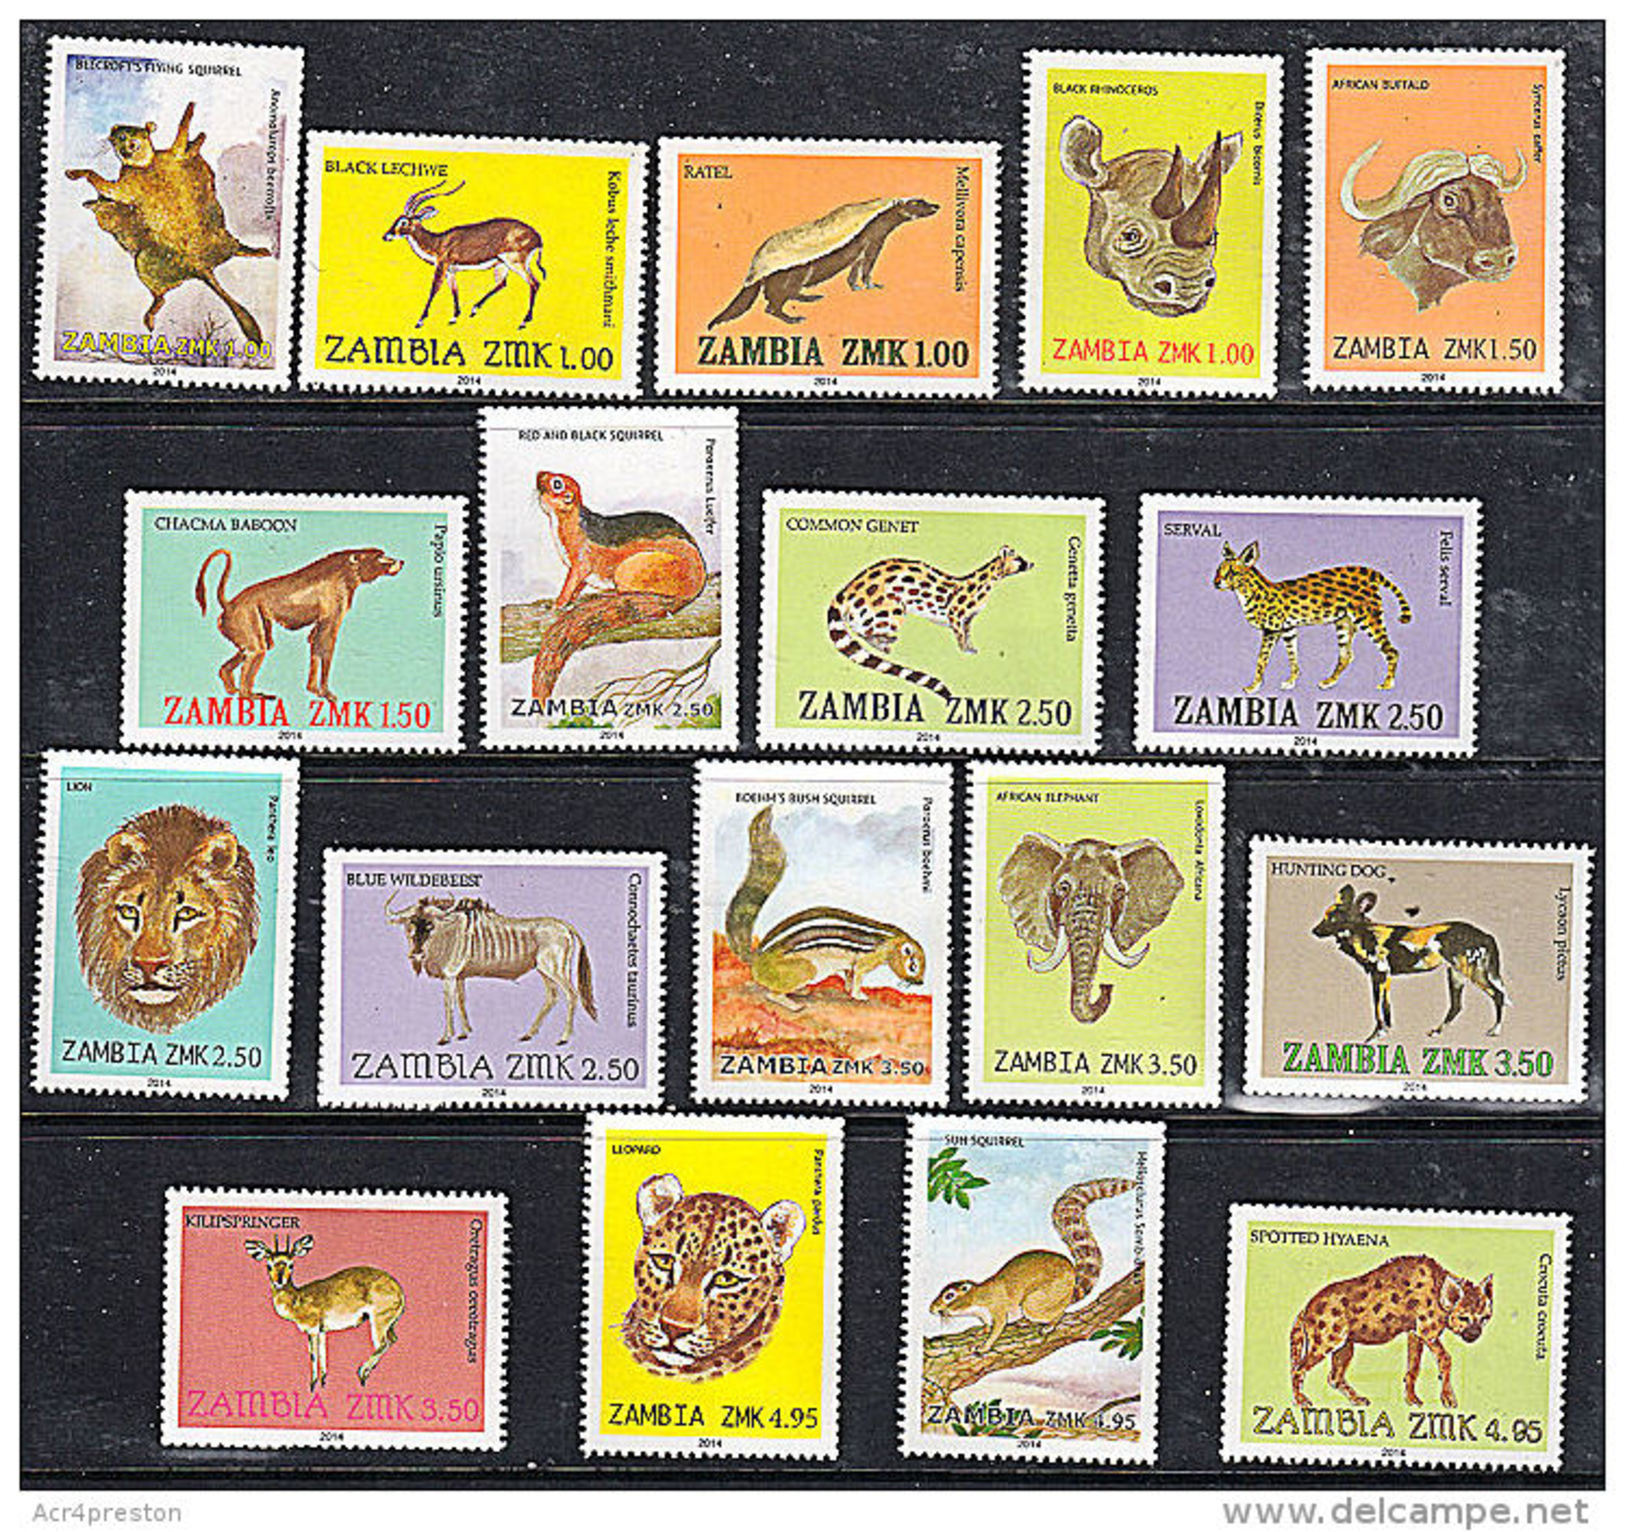 Zm1134 ZAMBIA 2014, NEW ISSUE, 3rd Issue Of Animals Set, In New Currency,  MNH - Zambie (1965-...)